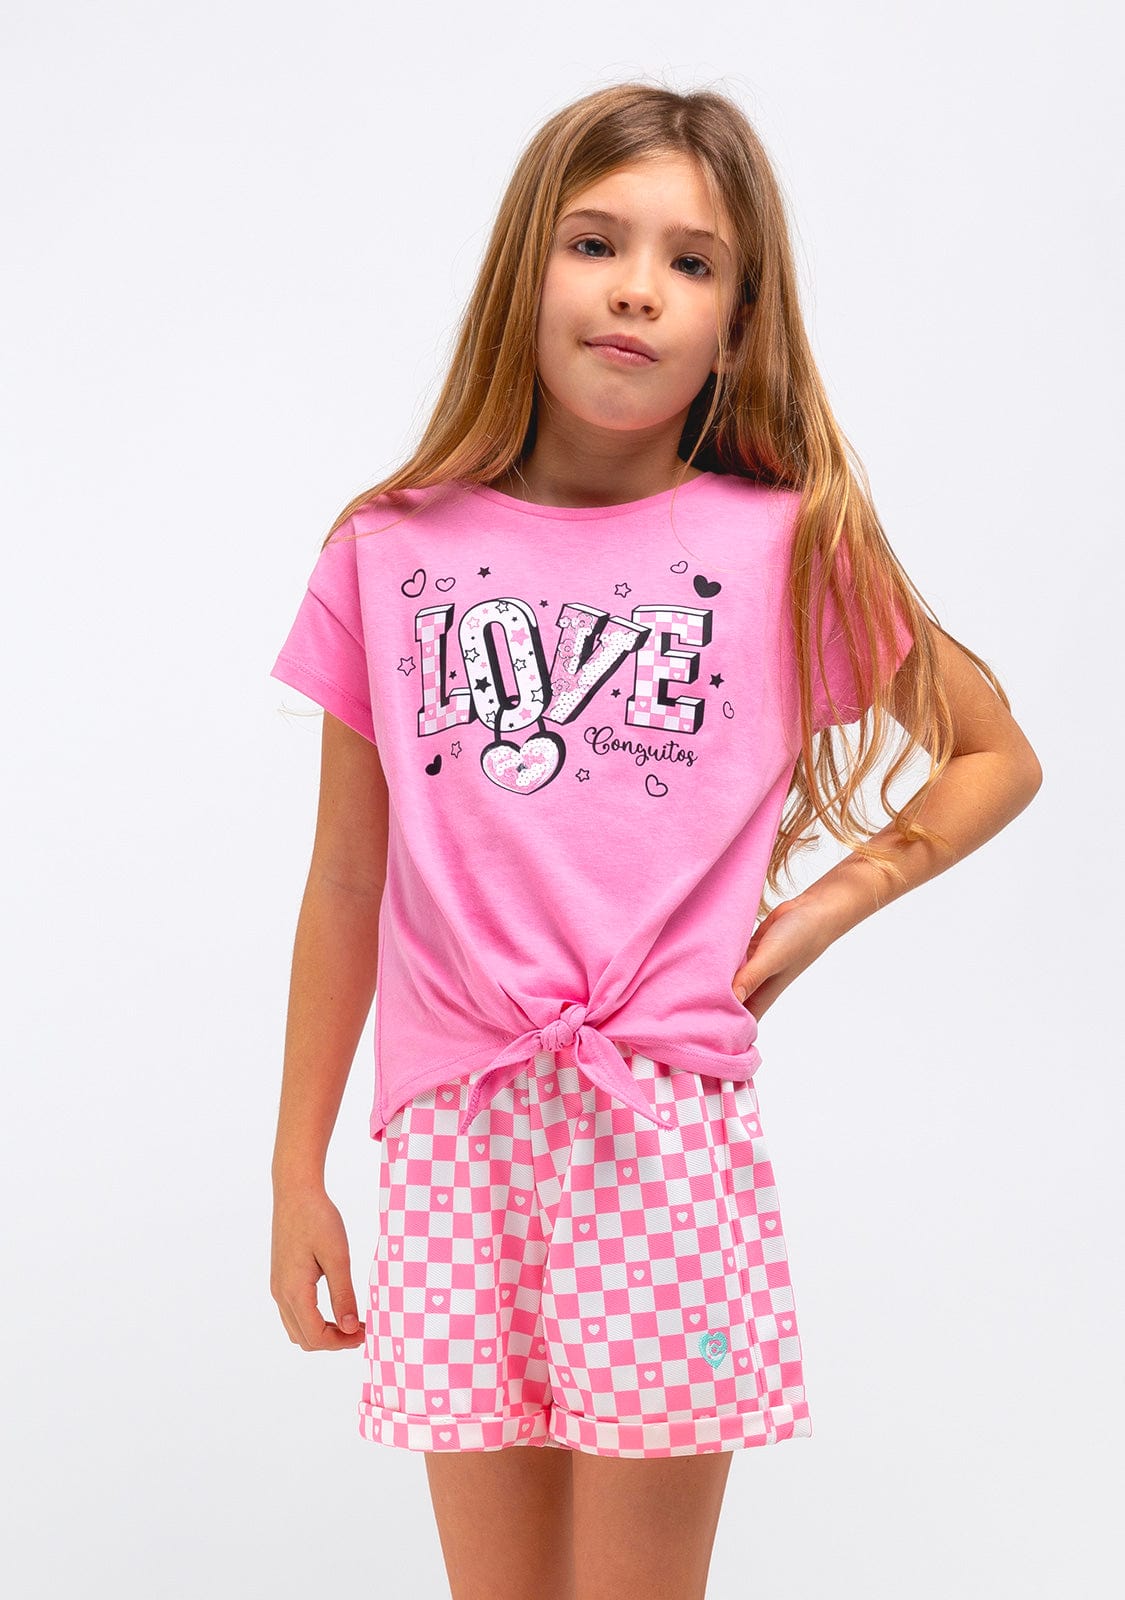 CONGUITOS TEXTIL Clothing Girl´s Pink Love Knotted Print T-shirt